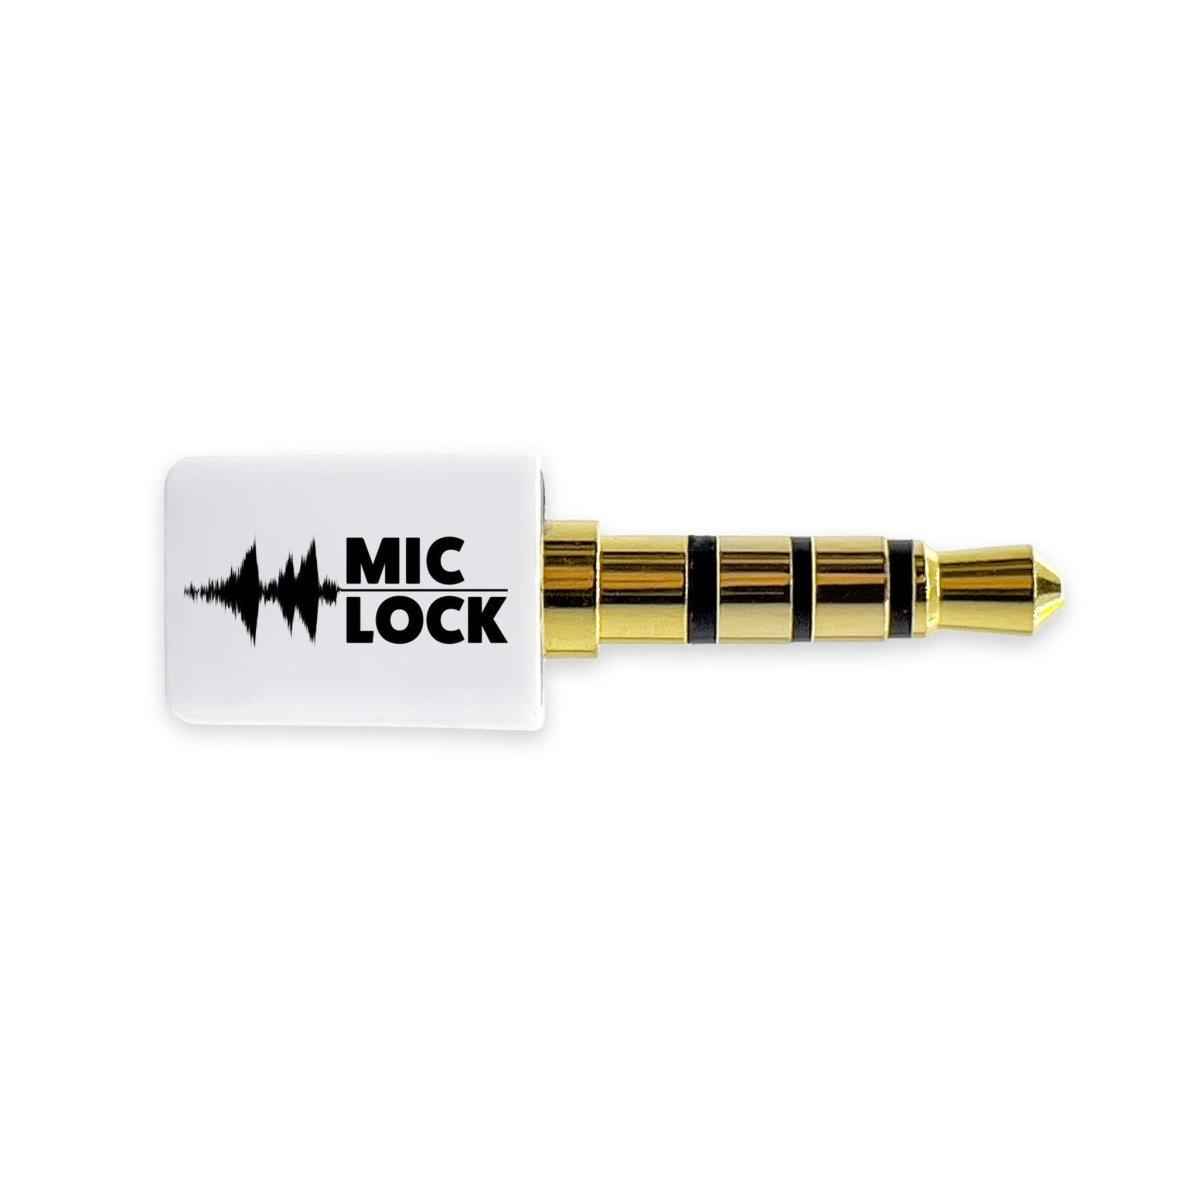 Mic-Lock Android Privacy Action Bundle - Mic-Lock